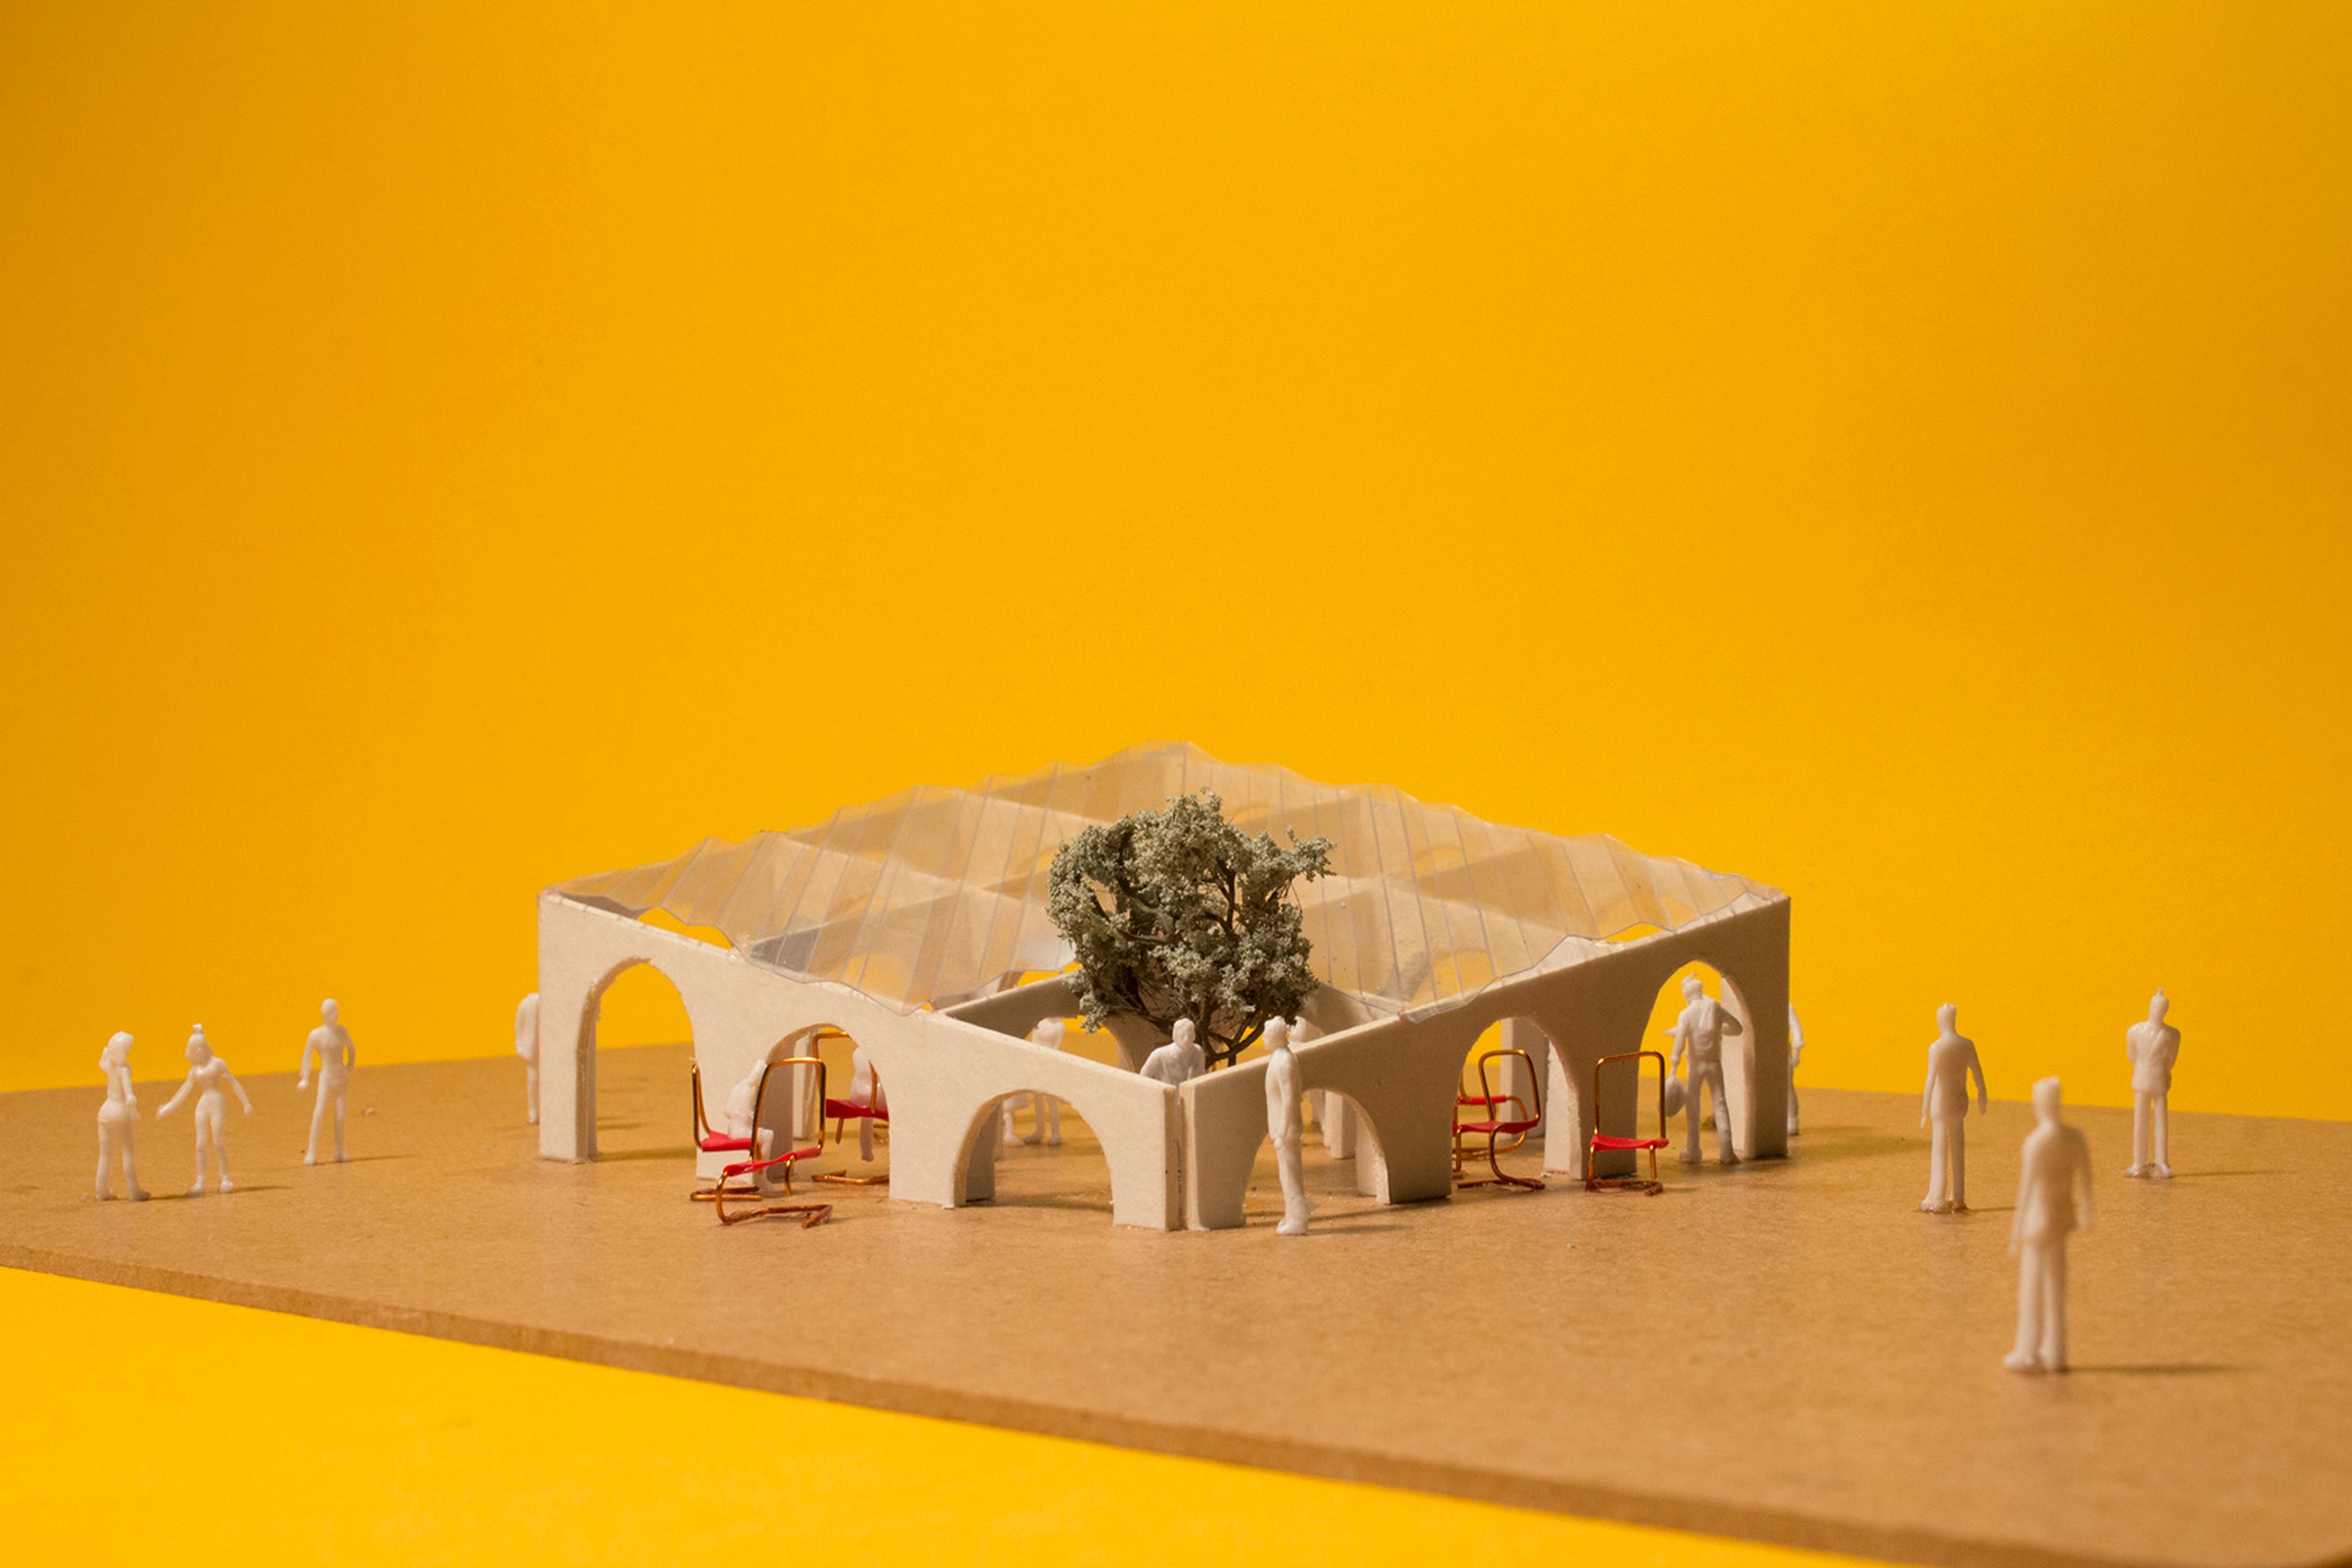 Architectural model of pavilion with chairs and people with a yellow background far view